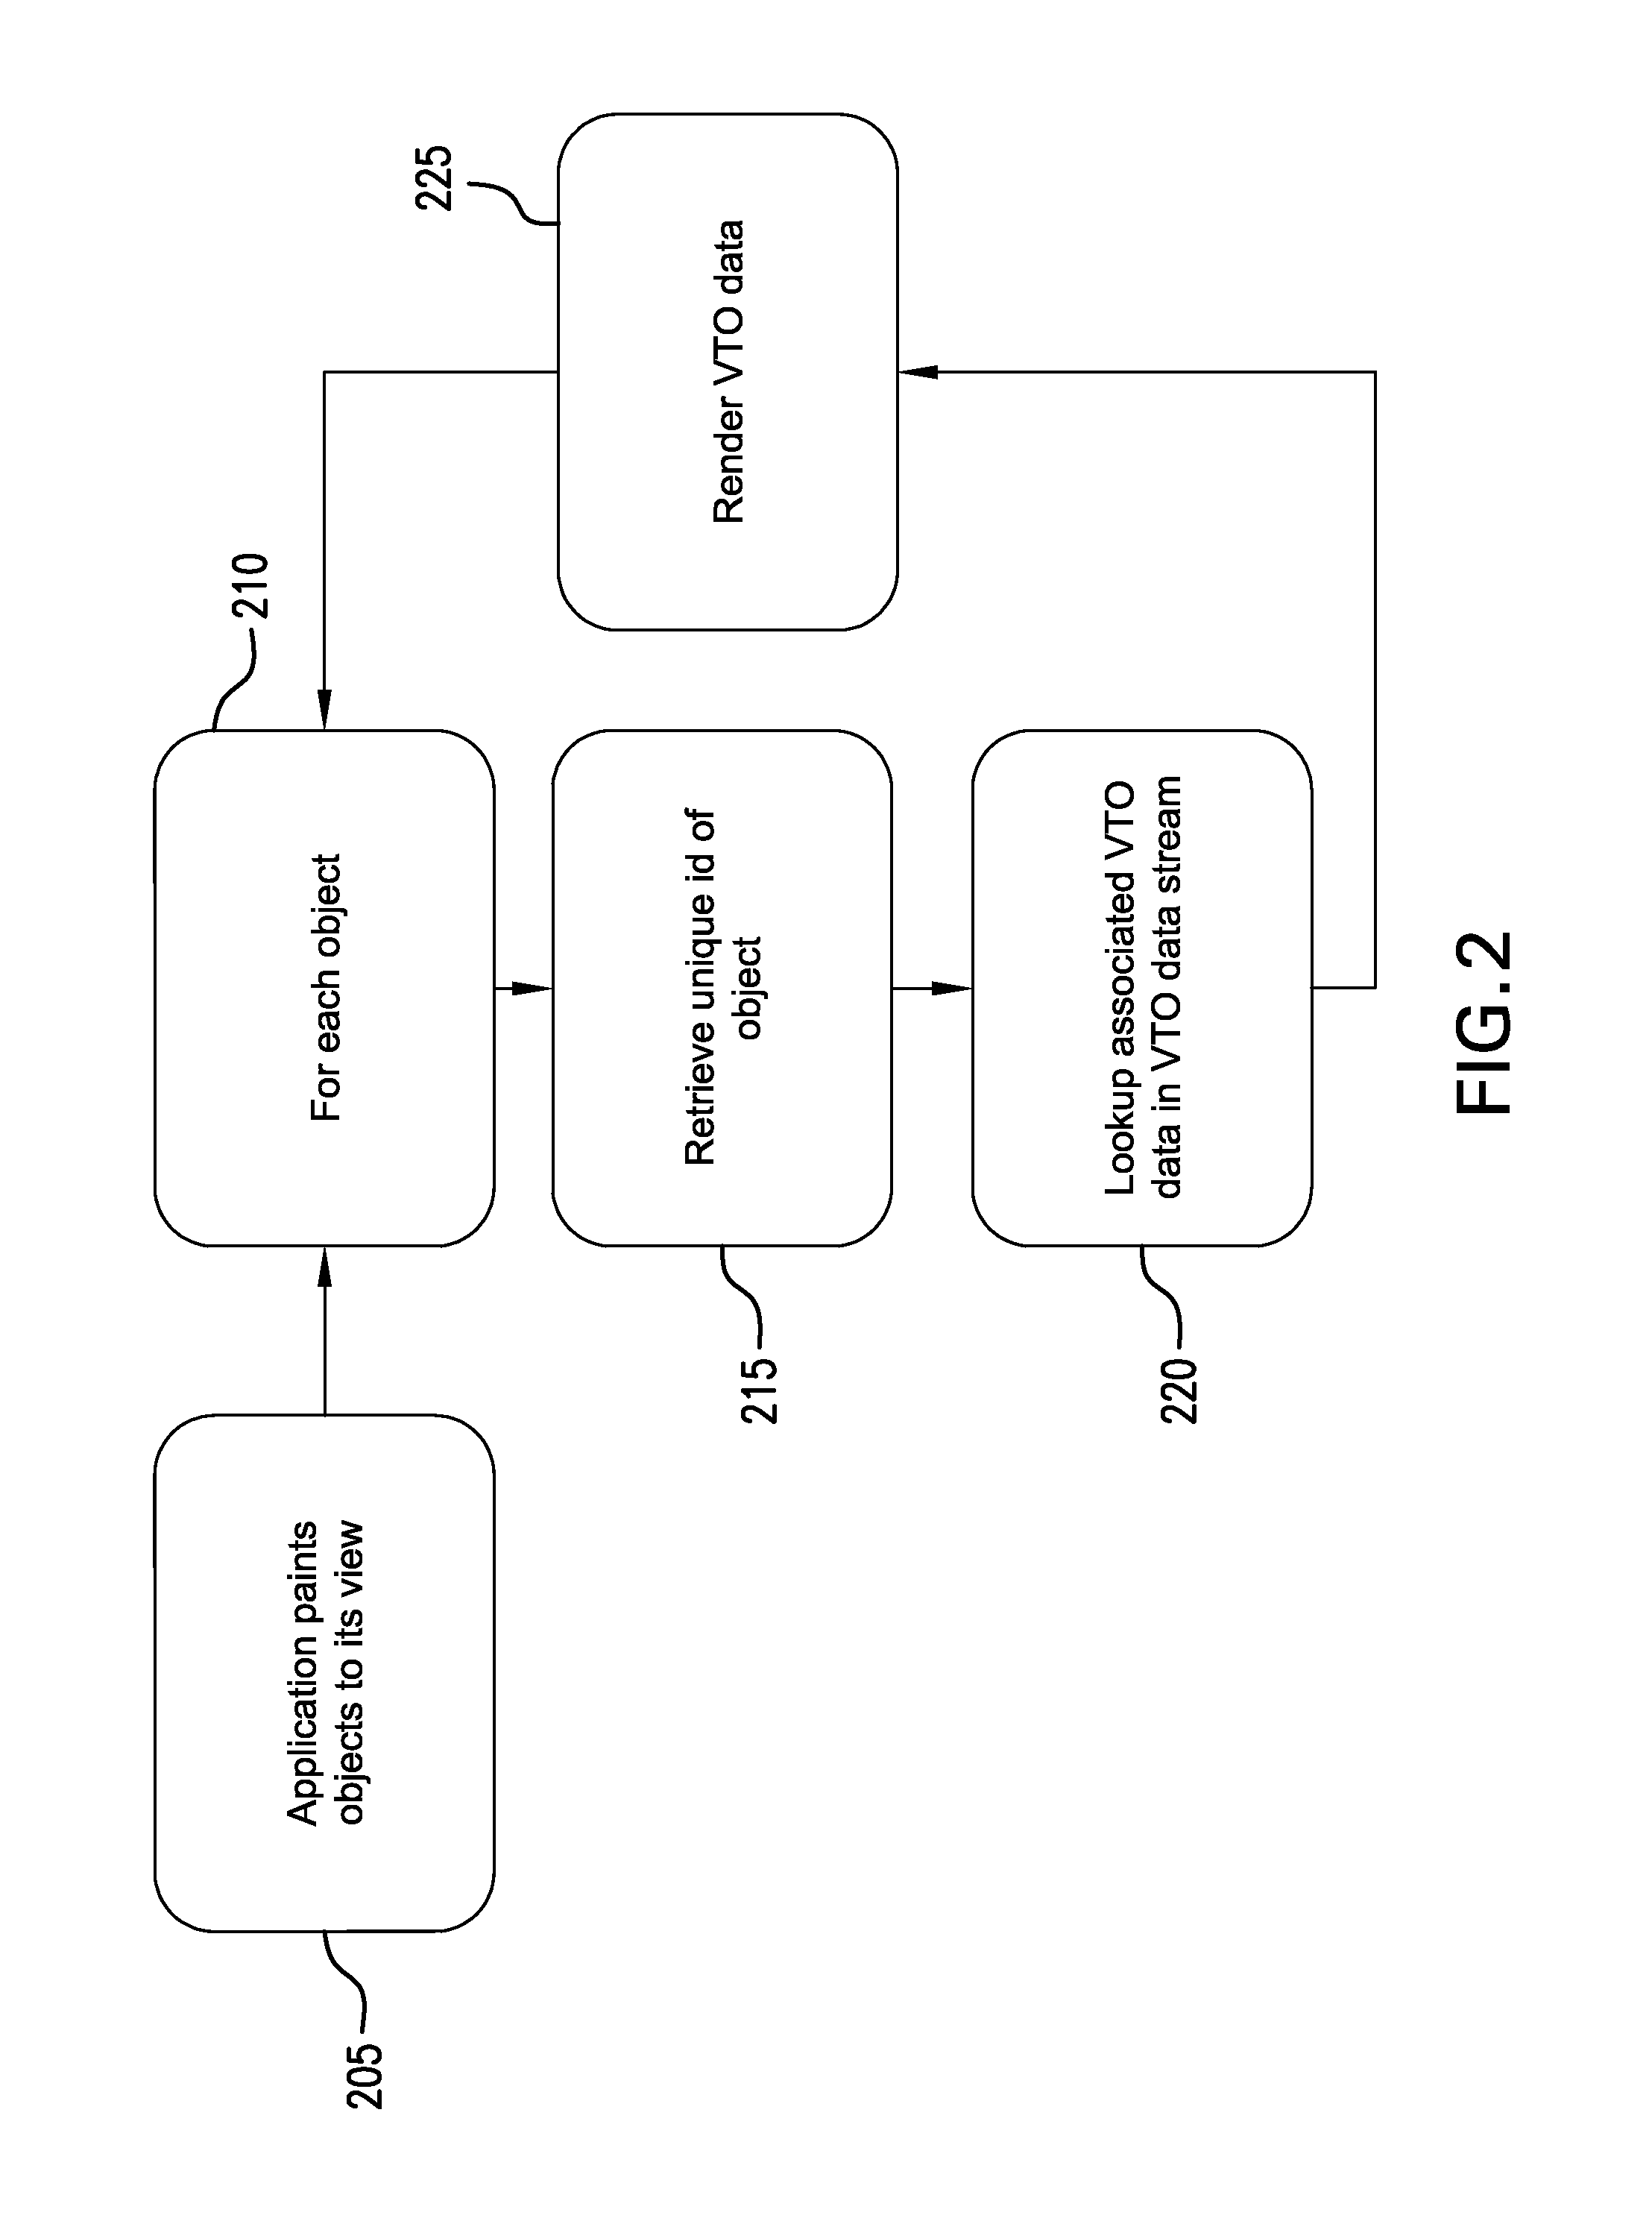 System and method for providing an inter-application overlay to communicate information between users and tools in the EDA design flow